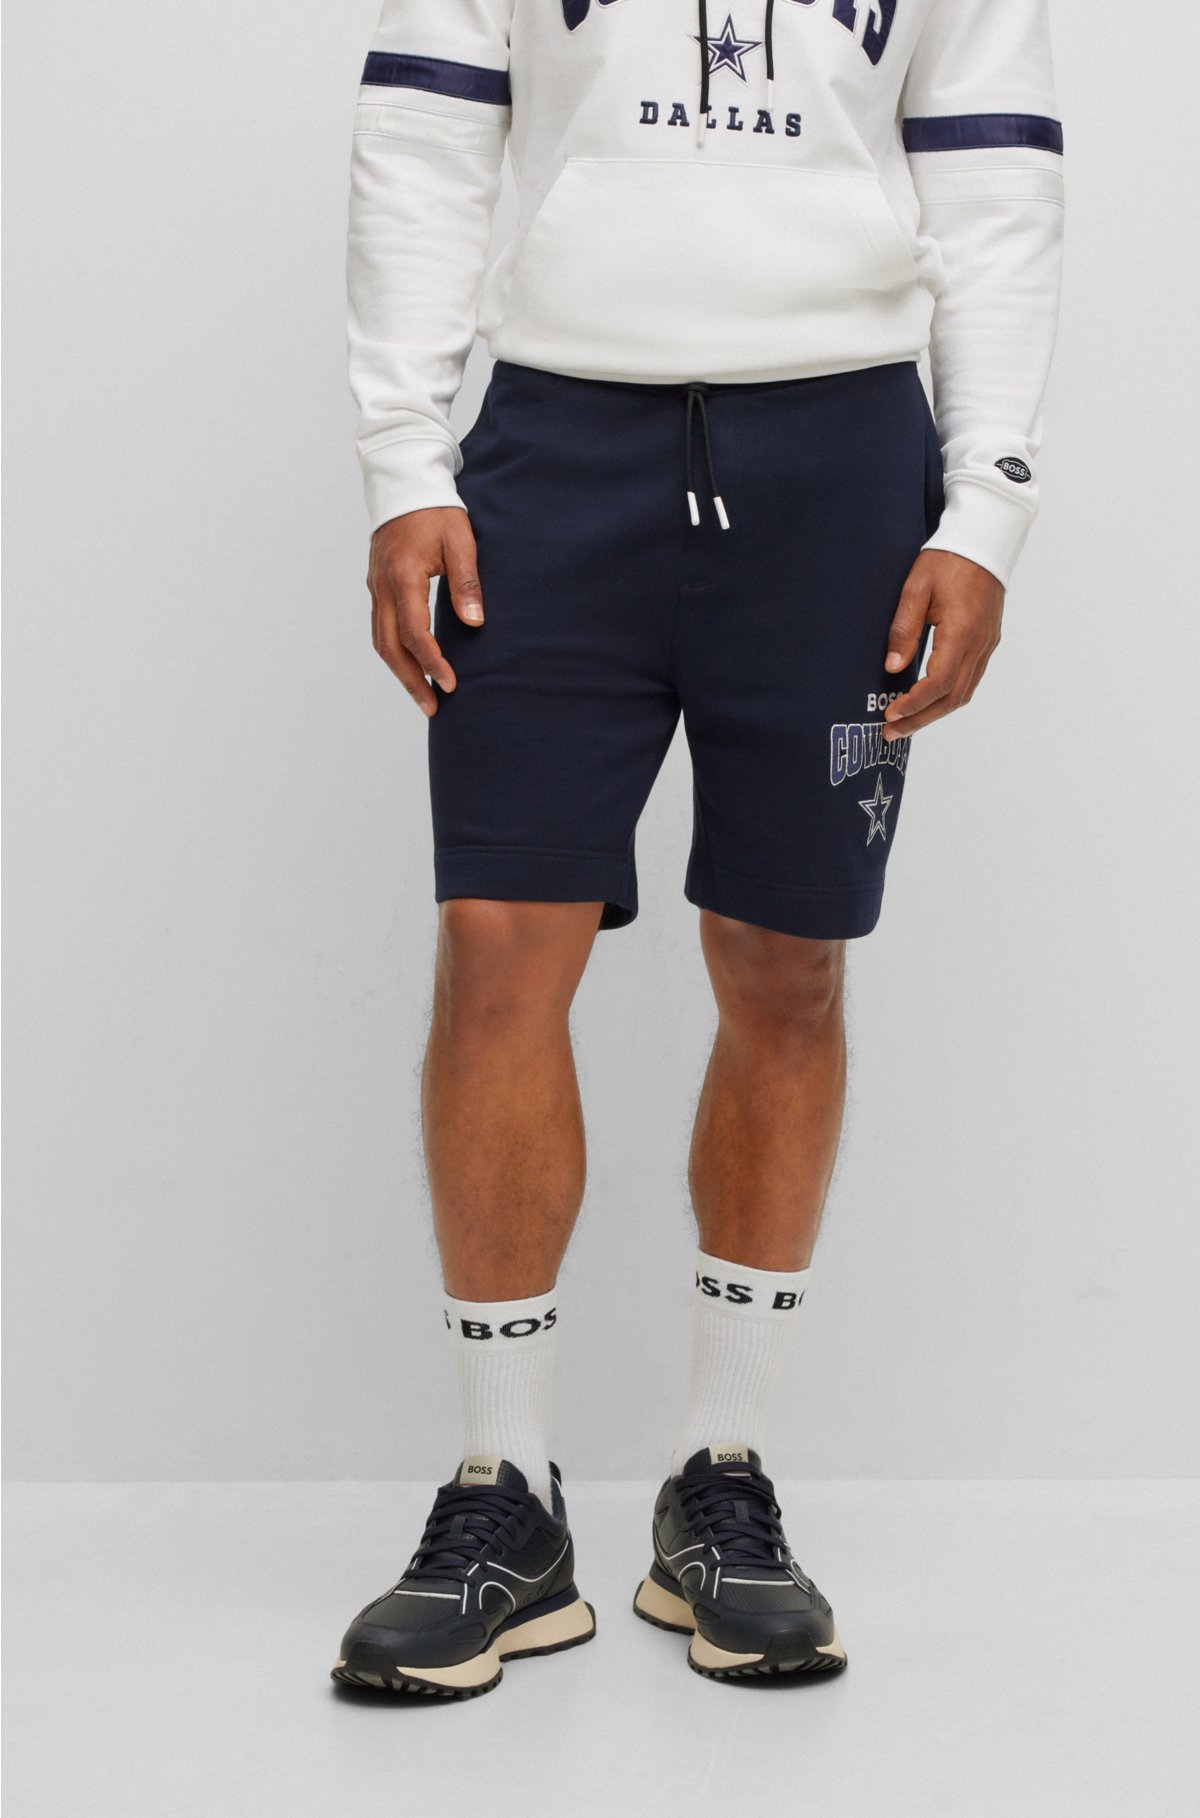 BOSS - BOSS collaborative cotton-terry branding x with shorts NFL